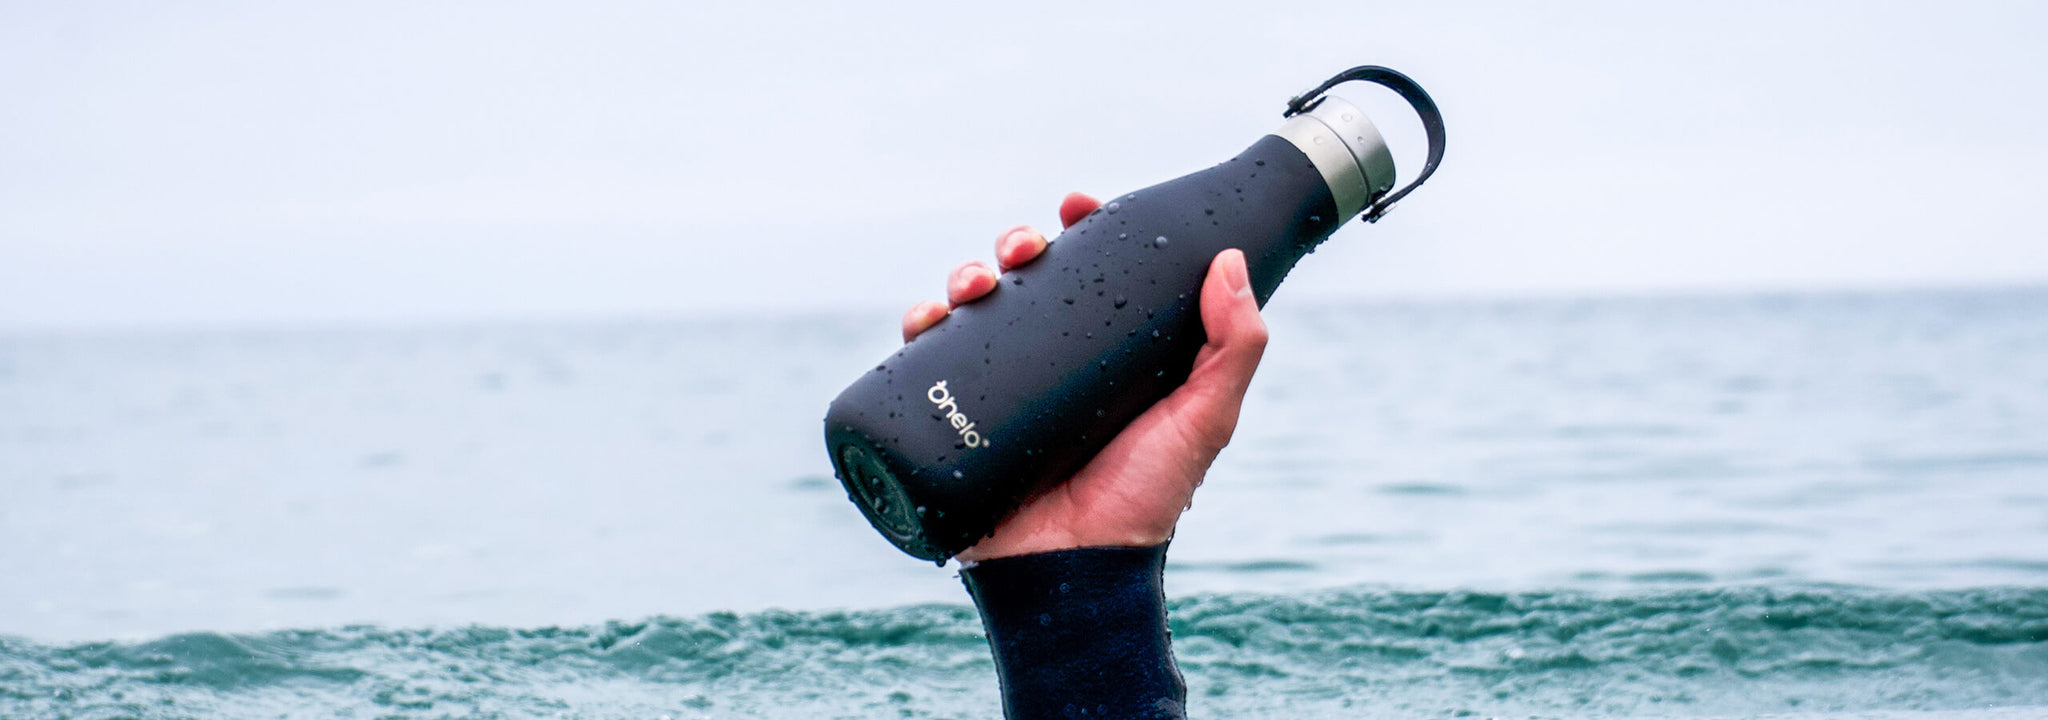 500ml black ohelo reusable water bottle being held by hand coming out of the ocean